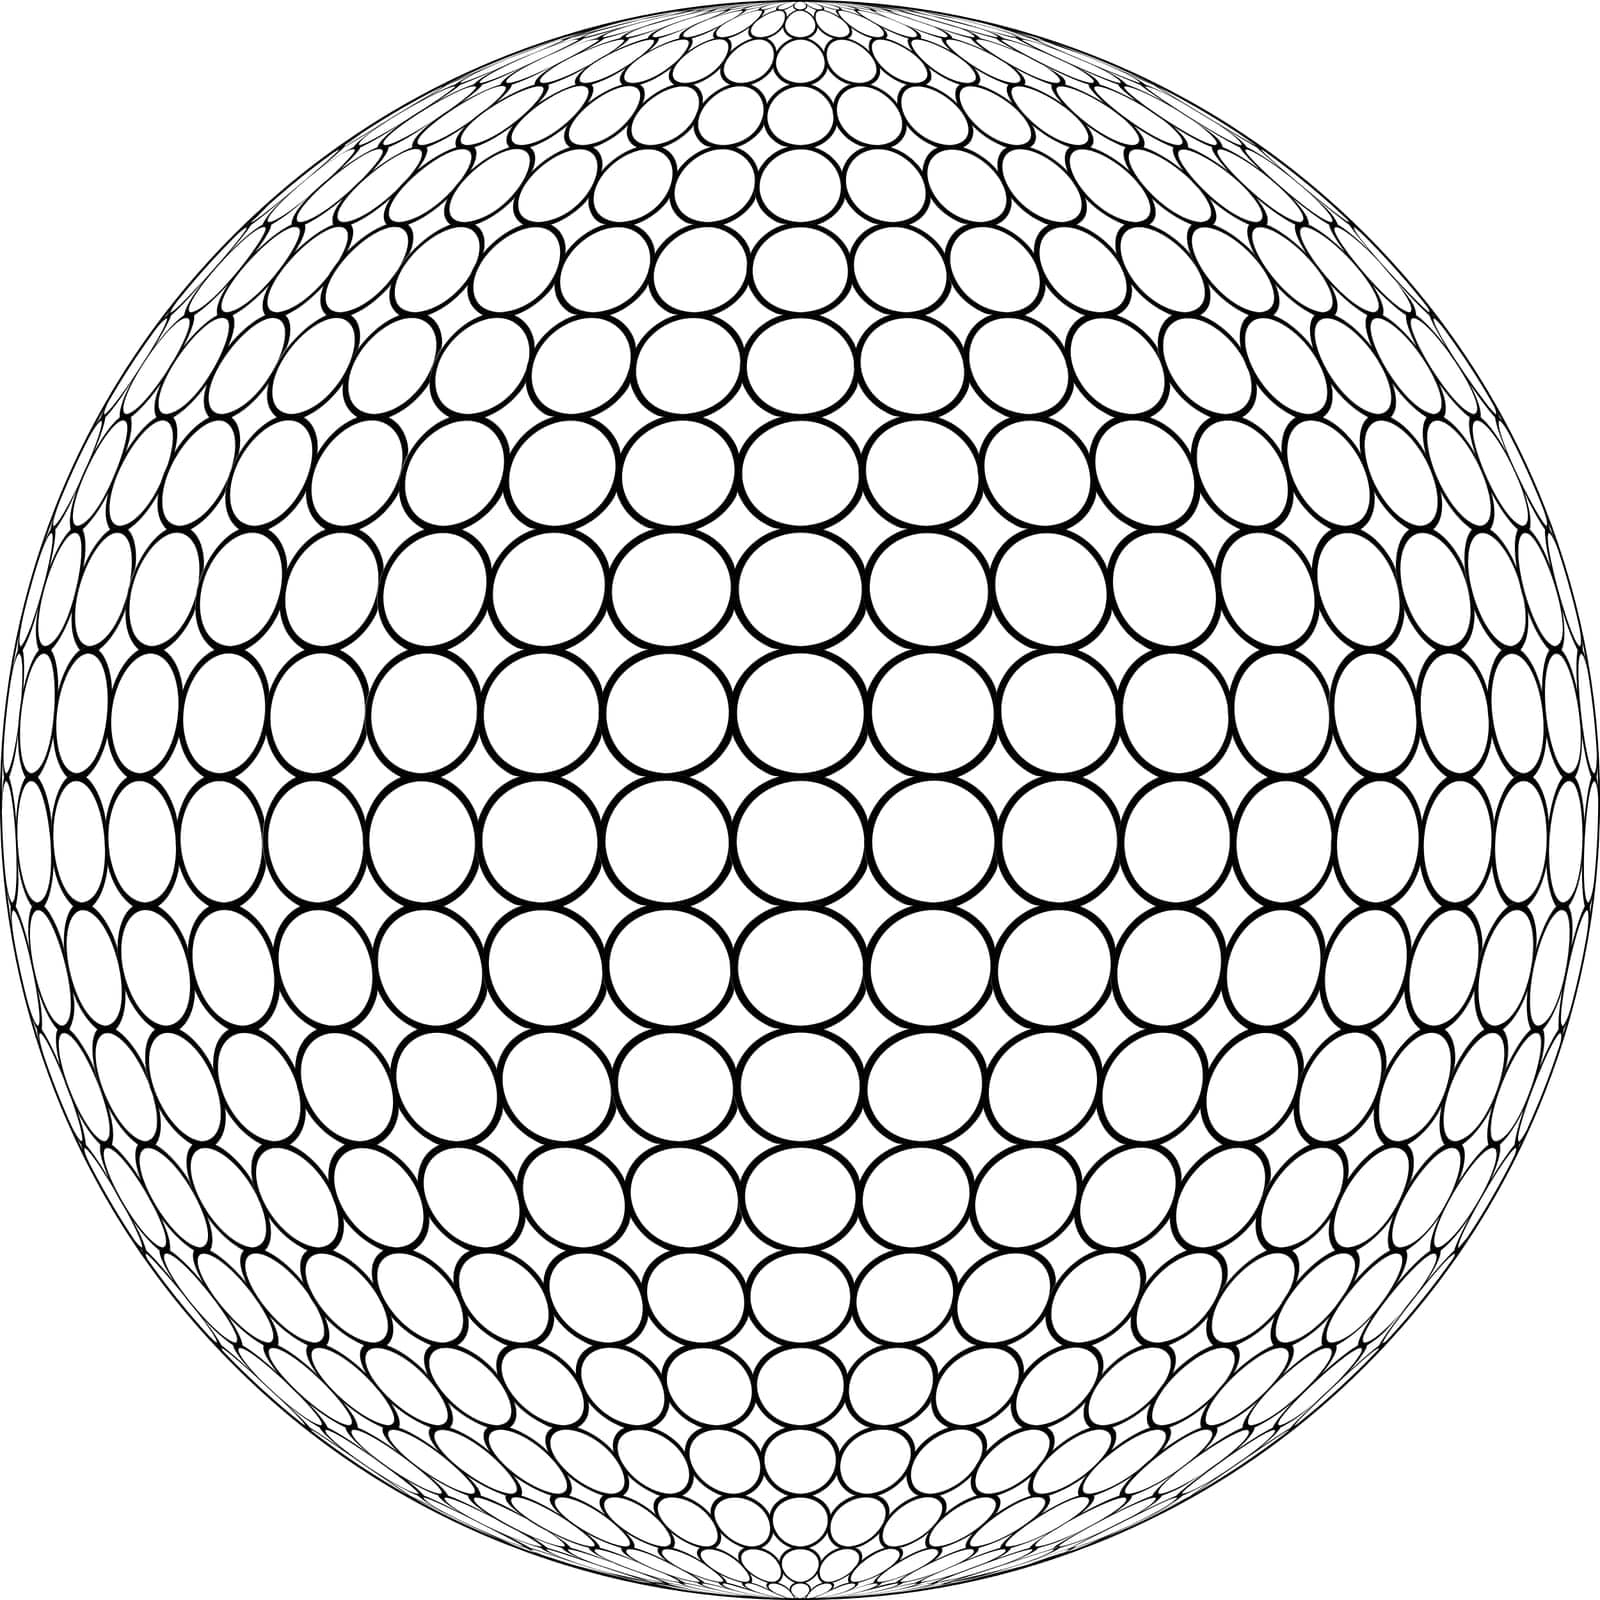 Globe 3D sphere ring mesh surface, round structure sphere